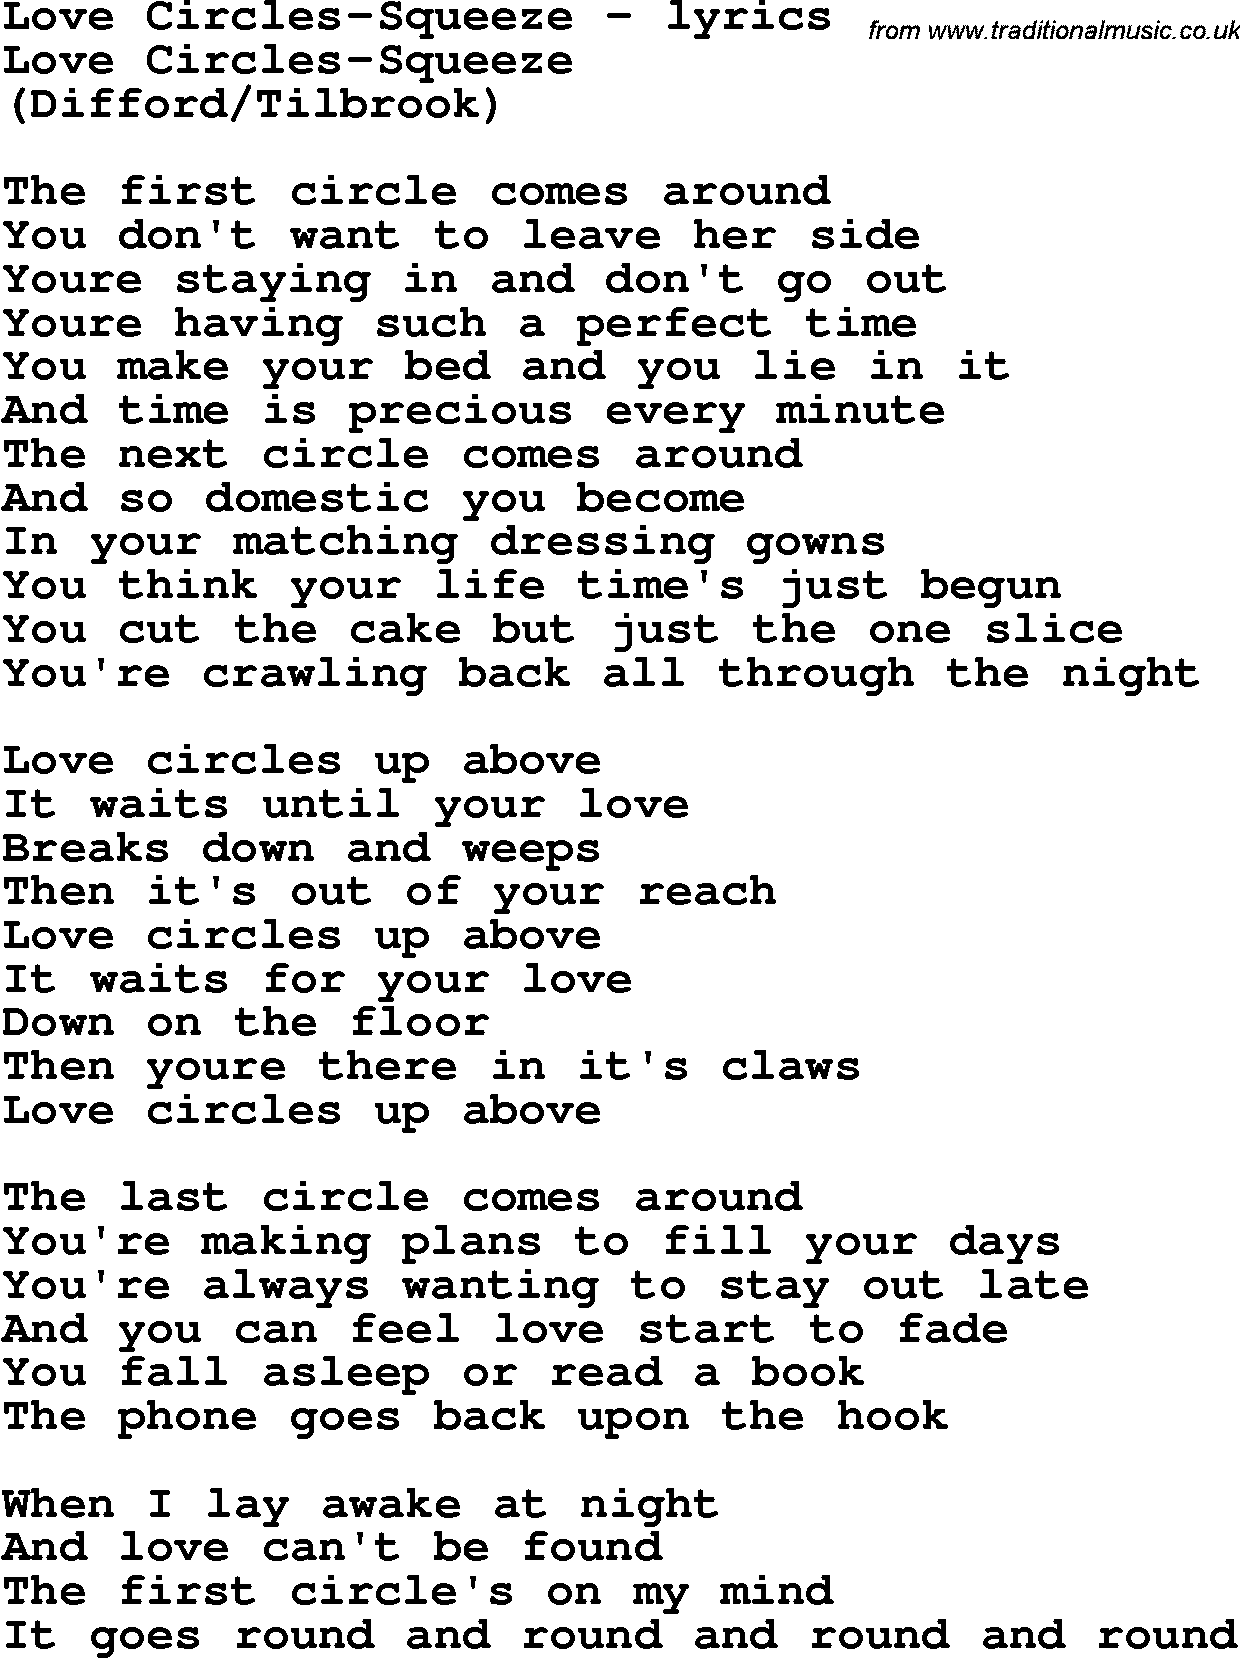 Love Song Lyrics for: Love Circles-Squeeze